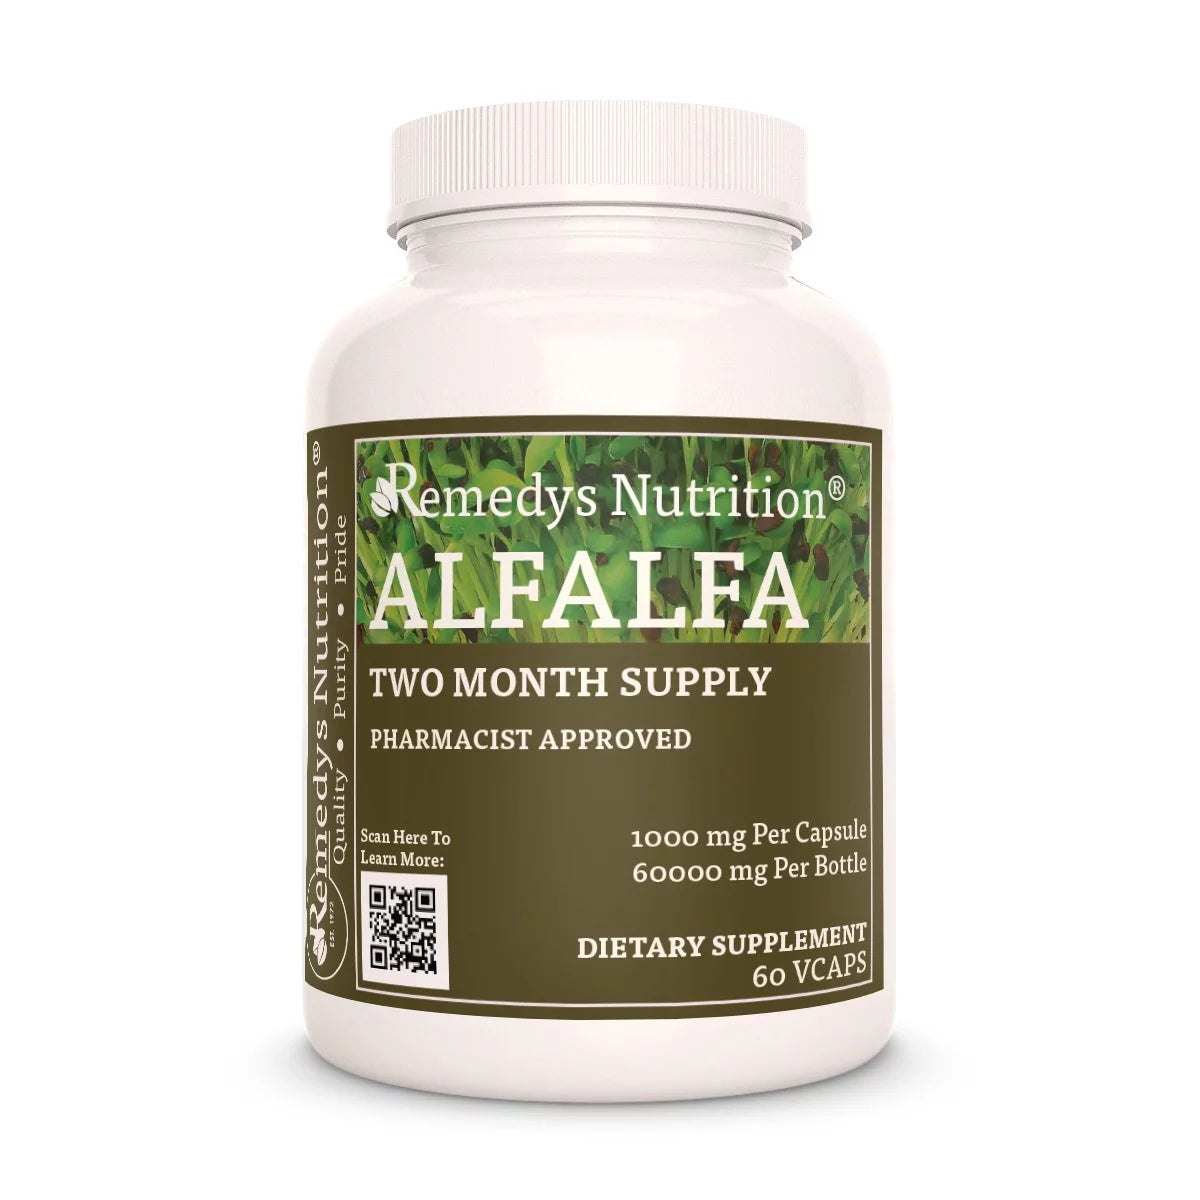 Image of Remedy's Nutrition® Alfalfa Capsules Dietary Supplement front bottle. Made in the USA. Medicago sativa.